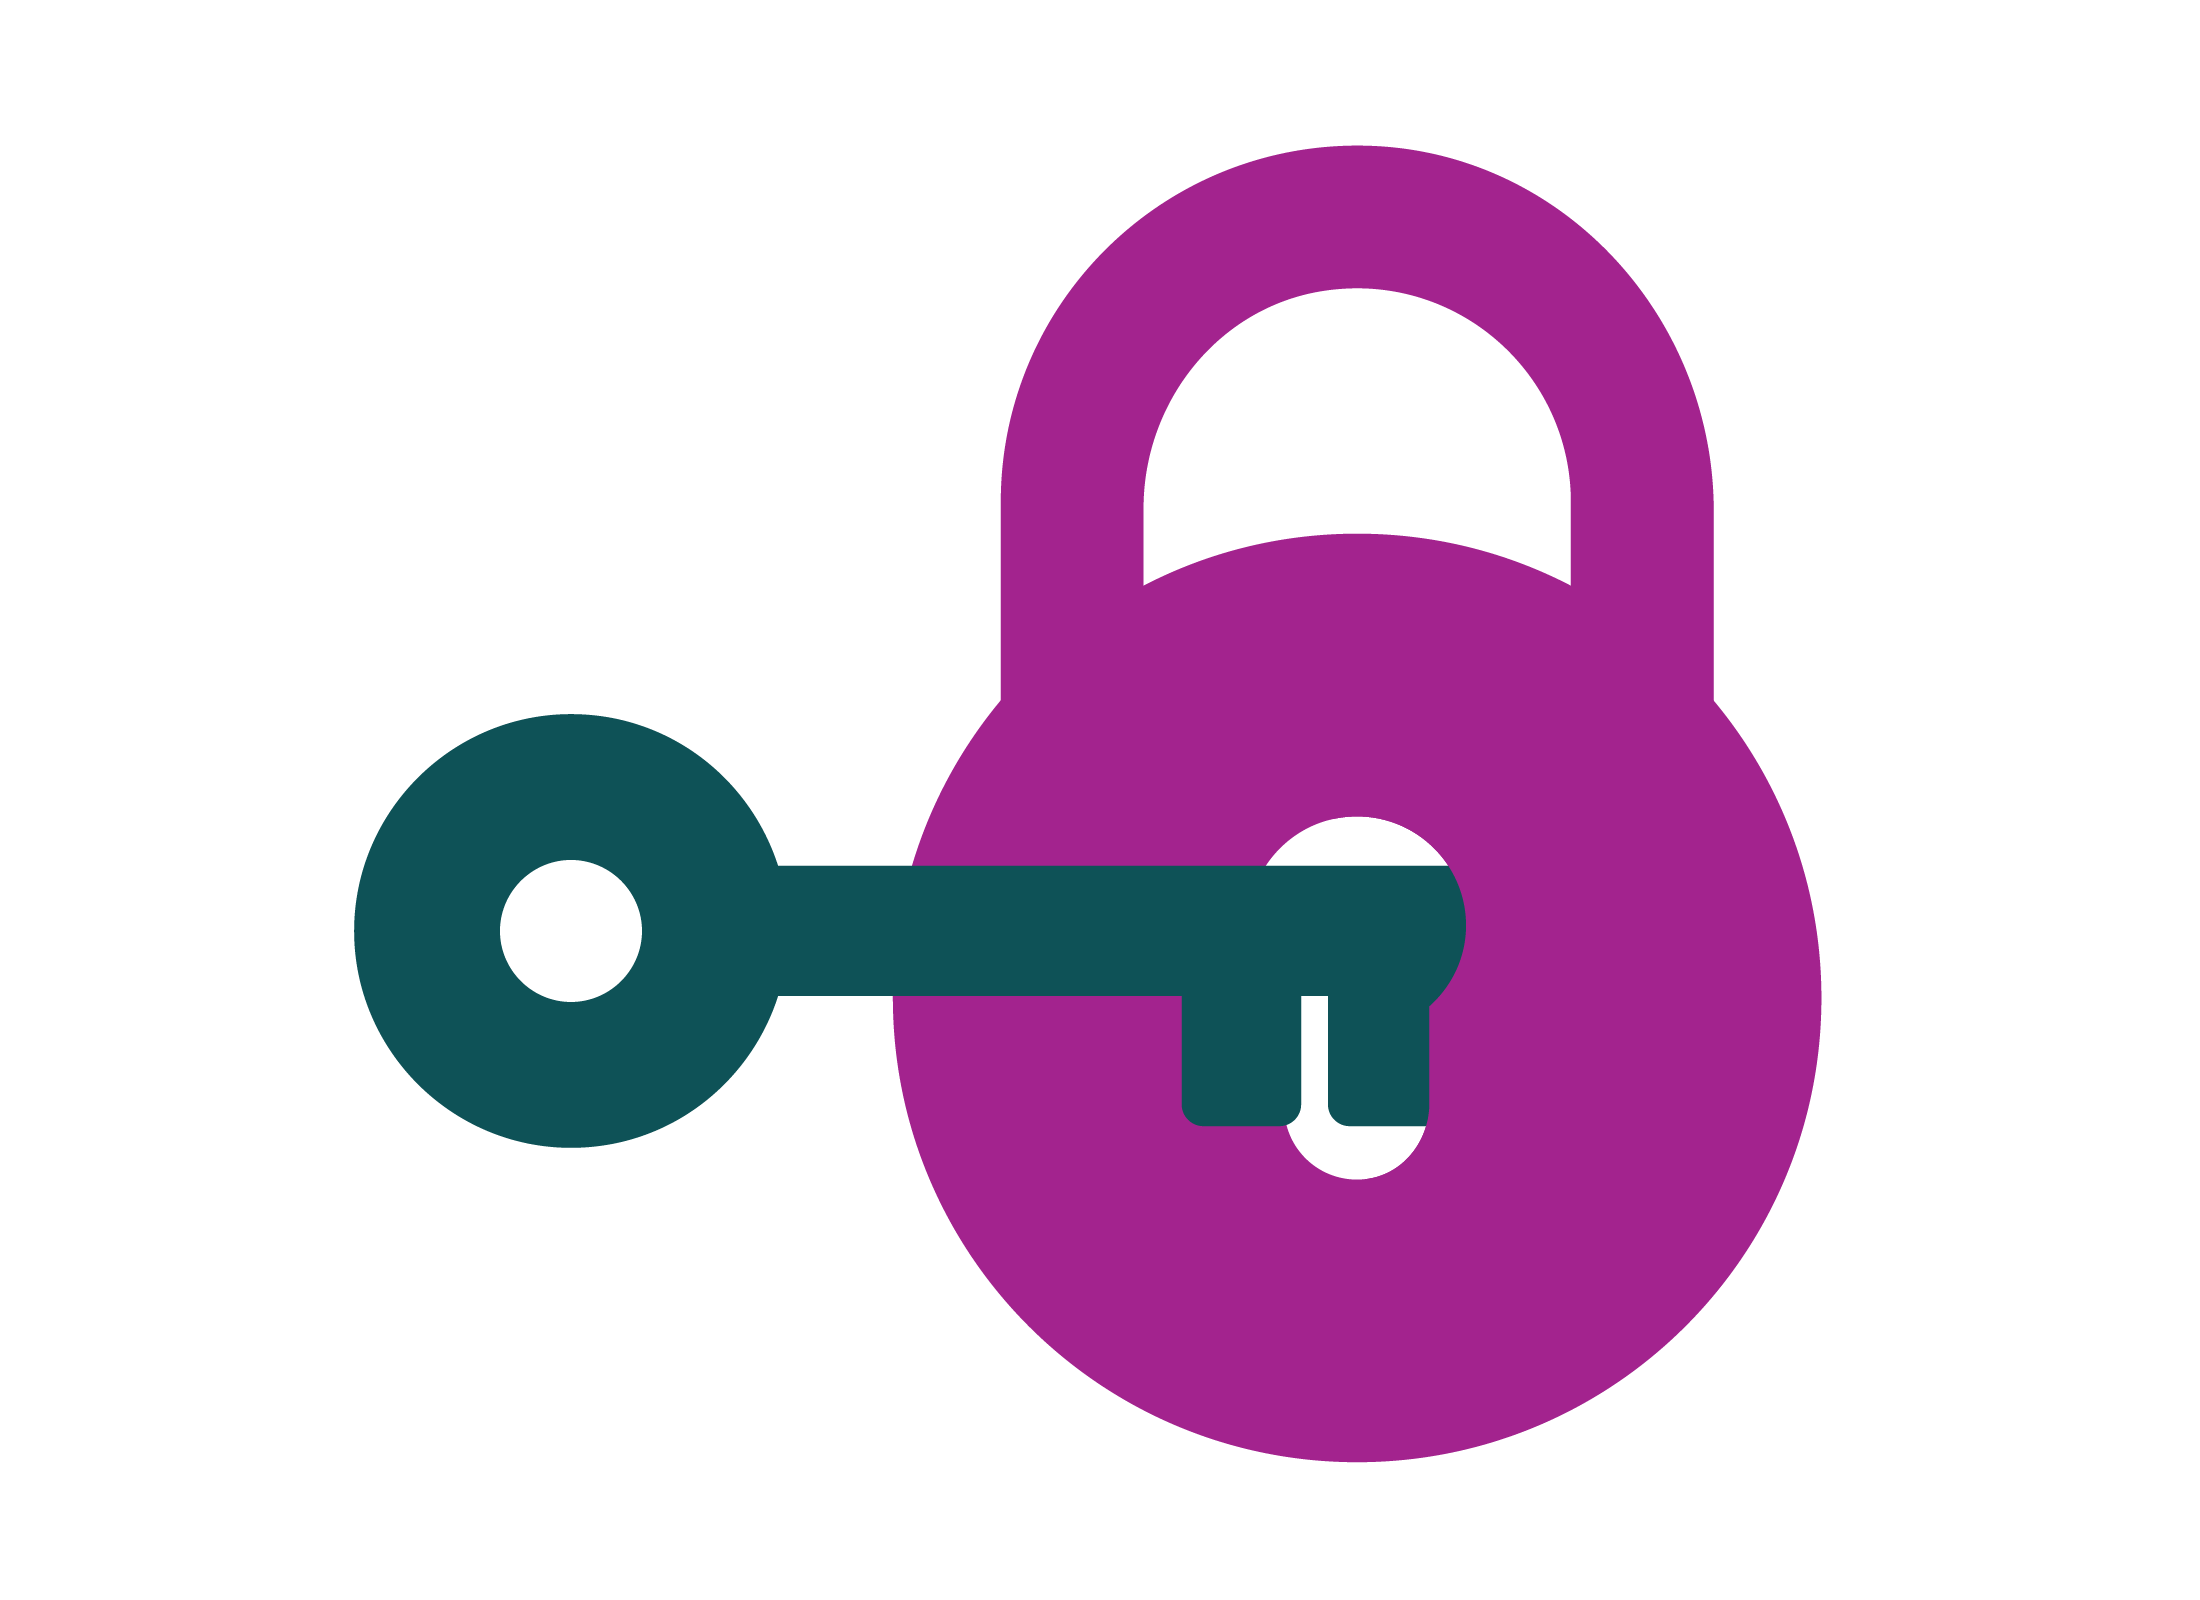 An illustration of a padlock and key